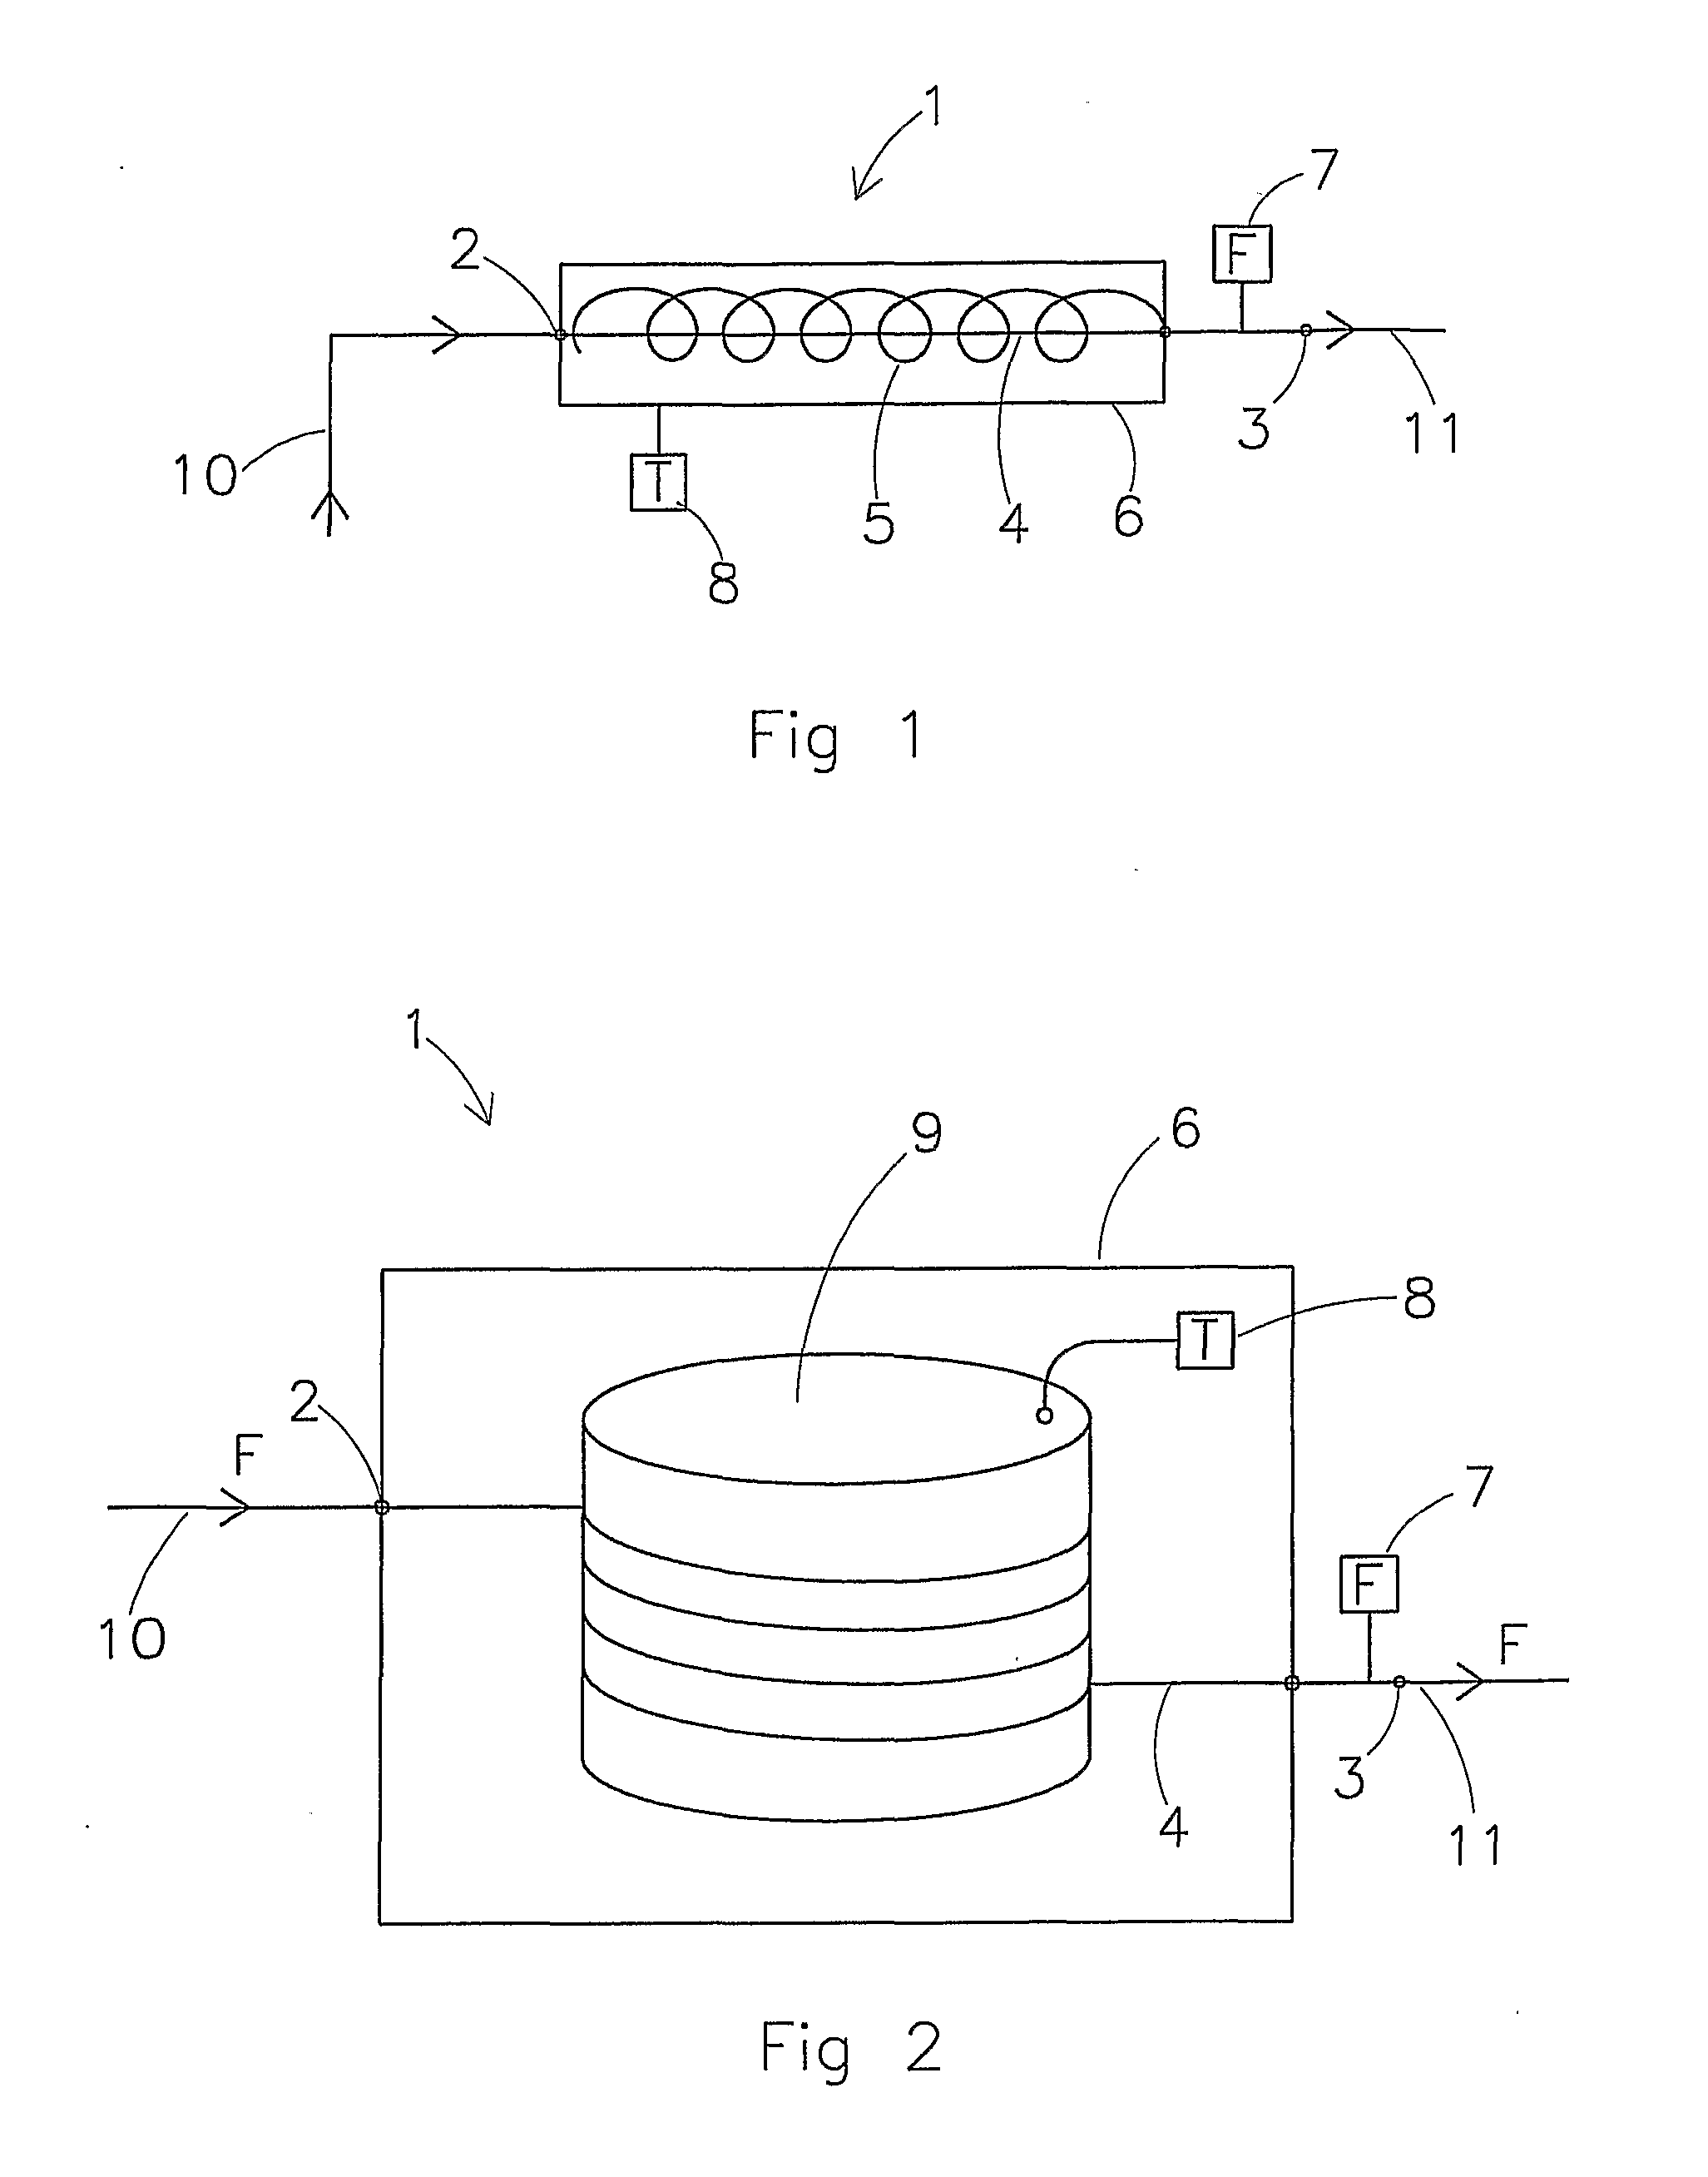 Reaction assembly and flow splitter